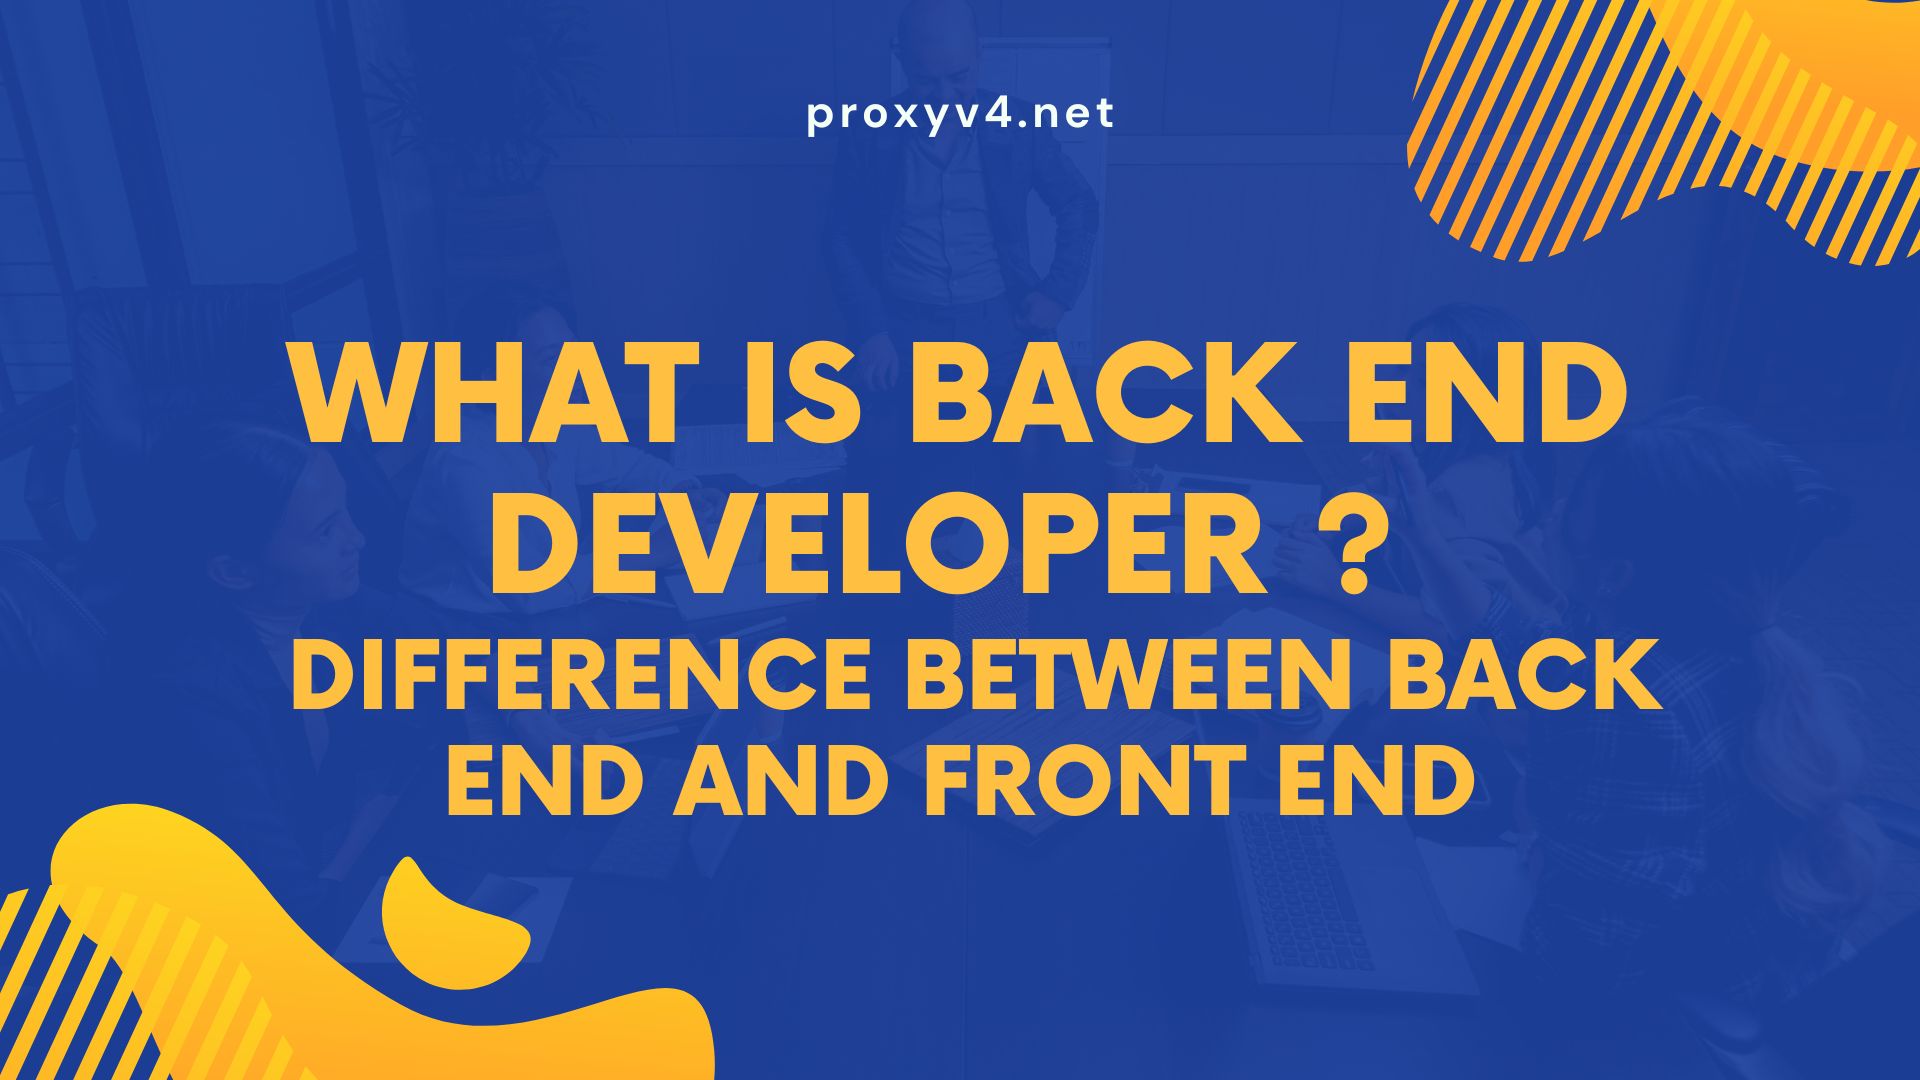 What is Back End Developer? Difference between back end and front end